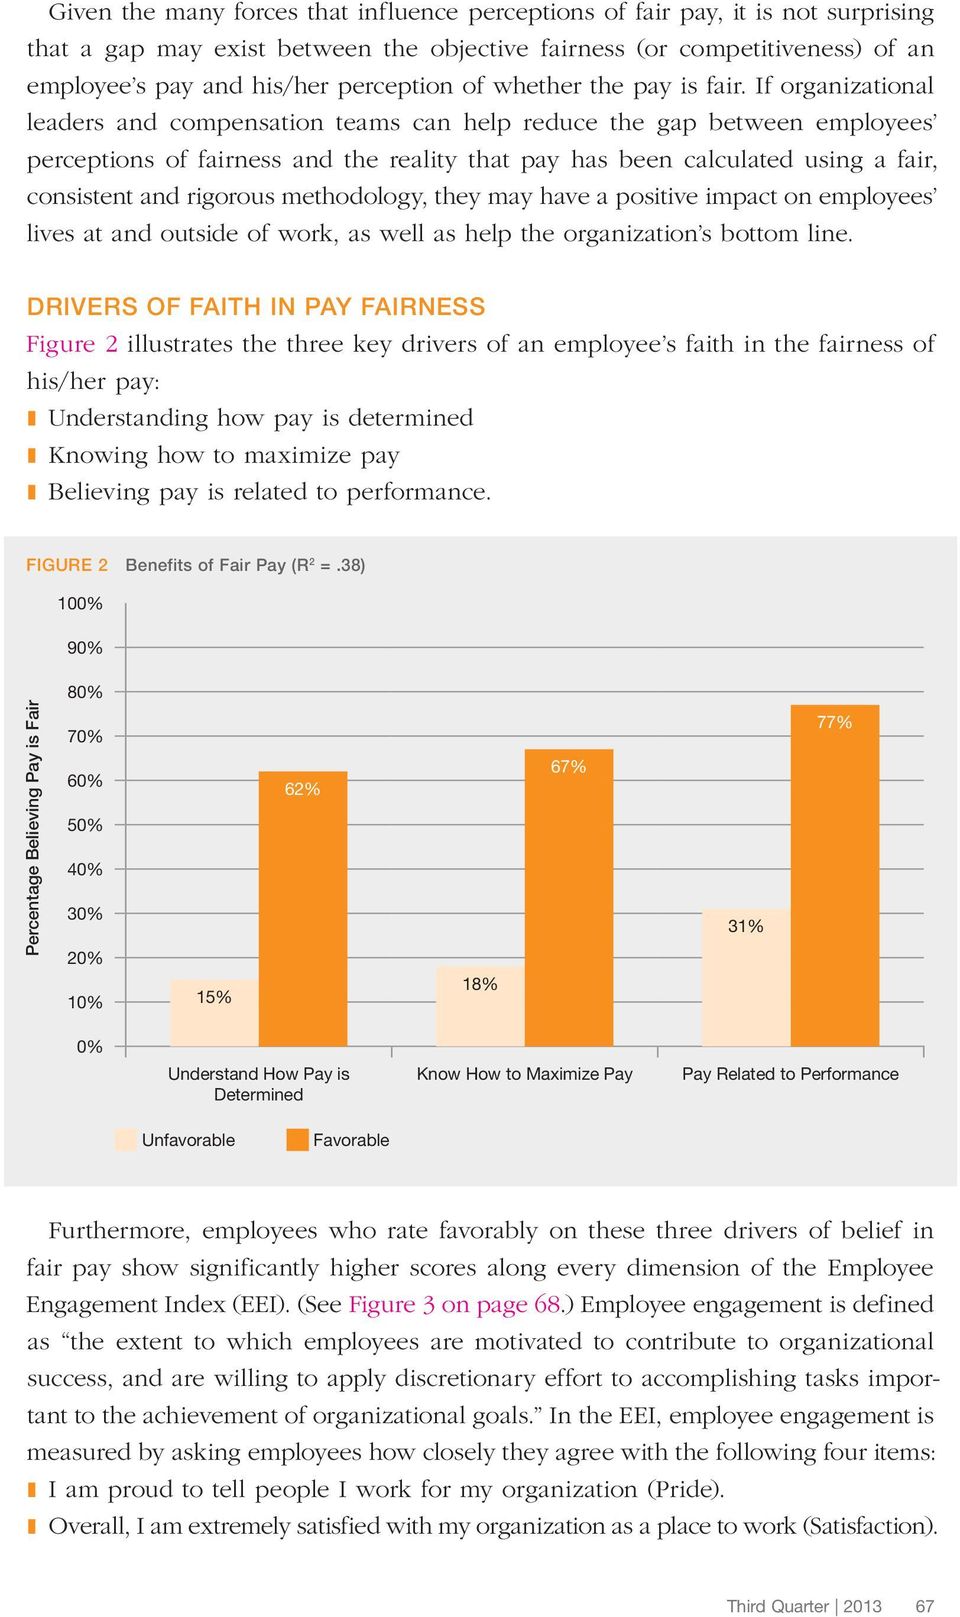 If organizational leaders and compensation teams can help reduce the gap between employees perceptions of fairness and the reality that pay has been calculated using a fair, consistent and rigorous